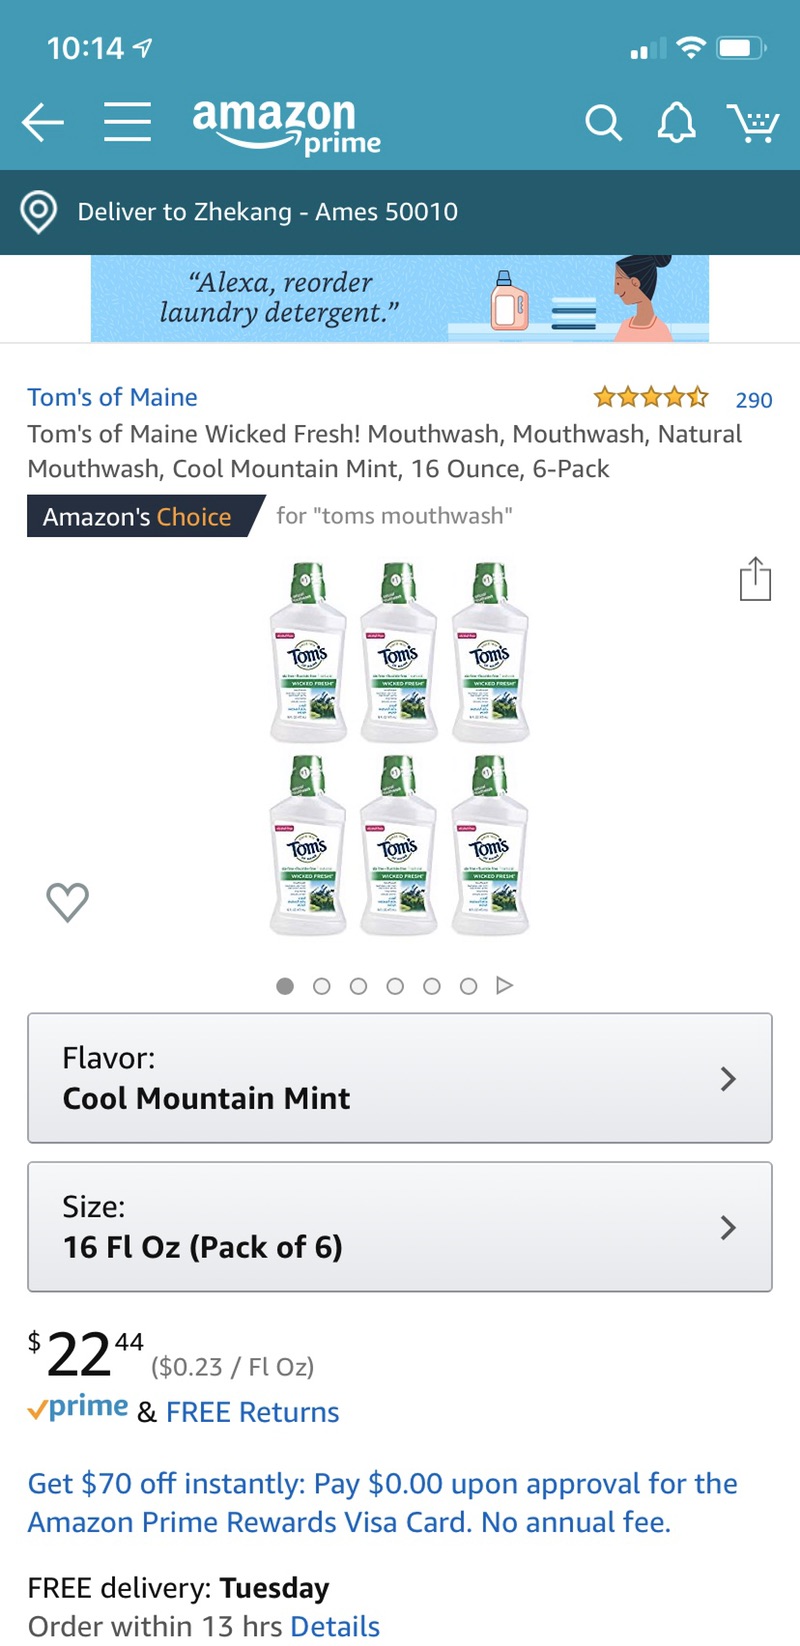 Amazon.com : Tom's of Maine Wicked Fresh! Mouthwash, Mouthwash, Natural Mouthwash, Cool Mountain Mint, 16 Ounce, 6-Pack : Beauty 缅因州汤姆漱口水（6瓶）